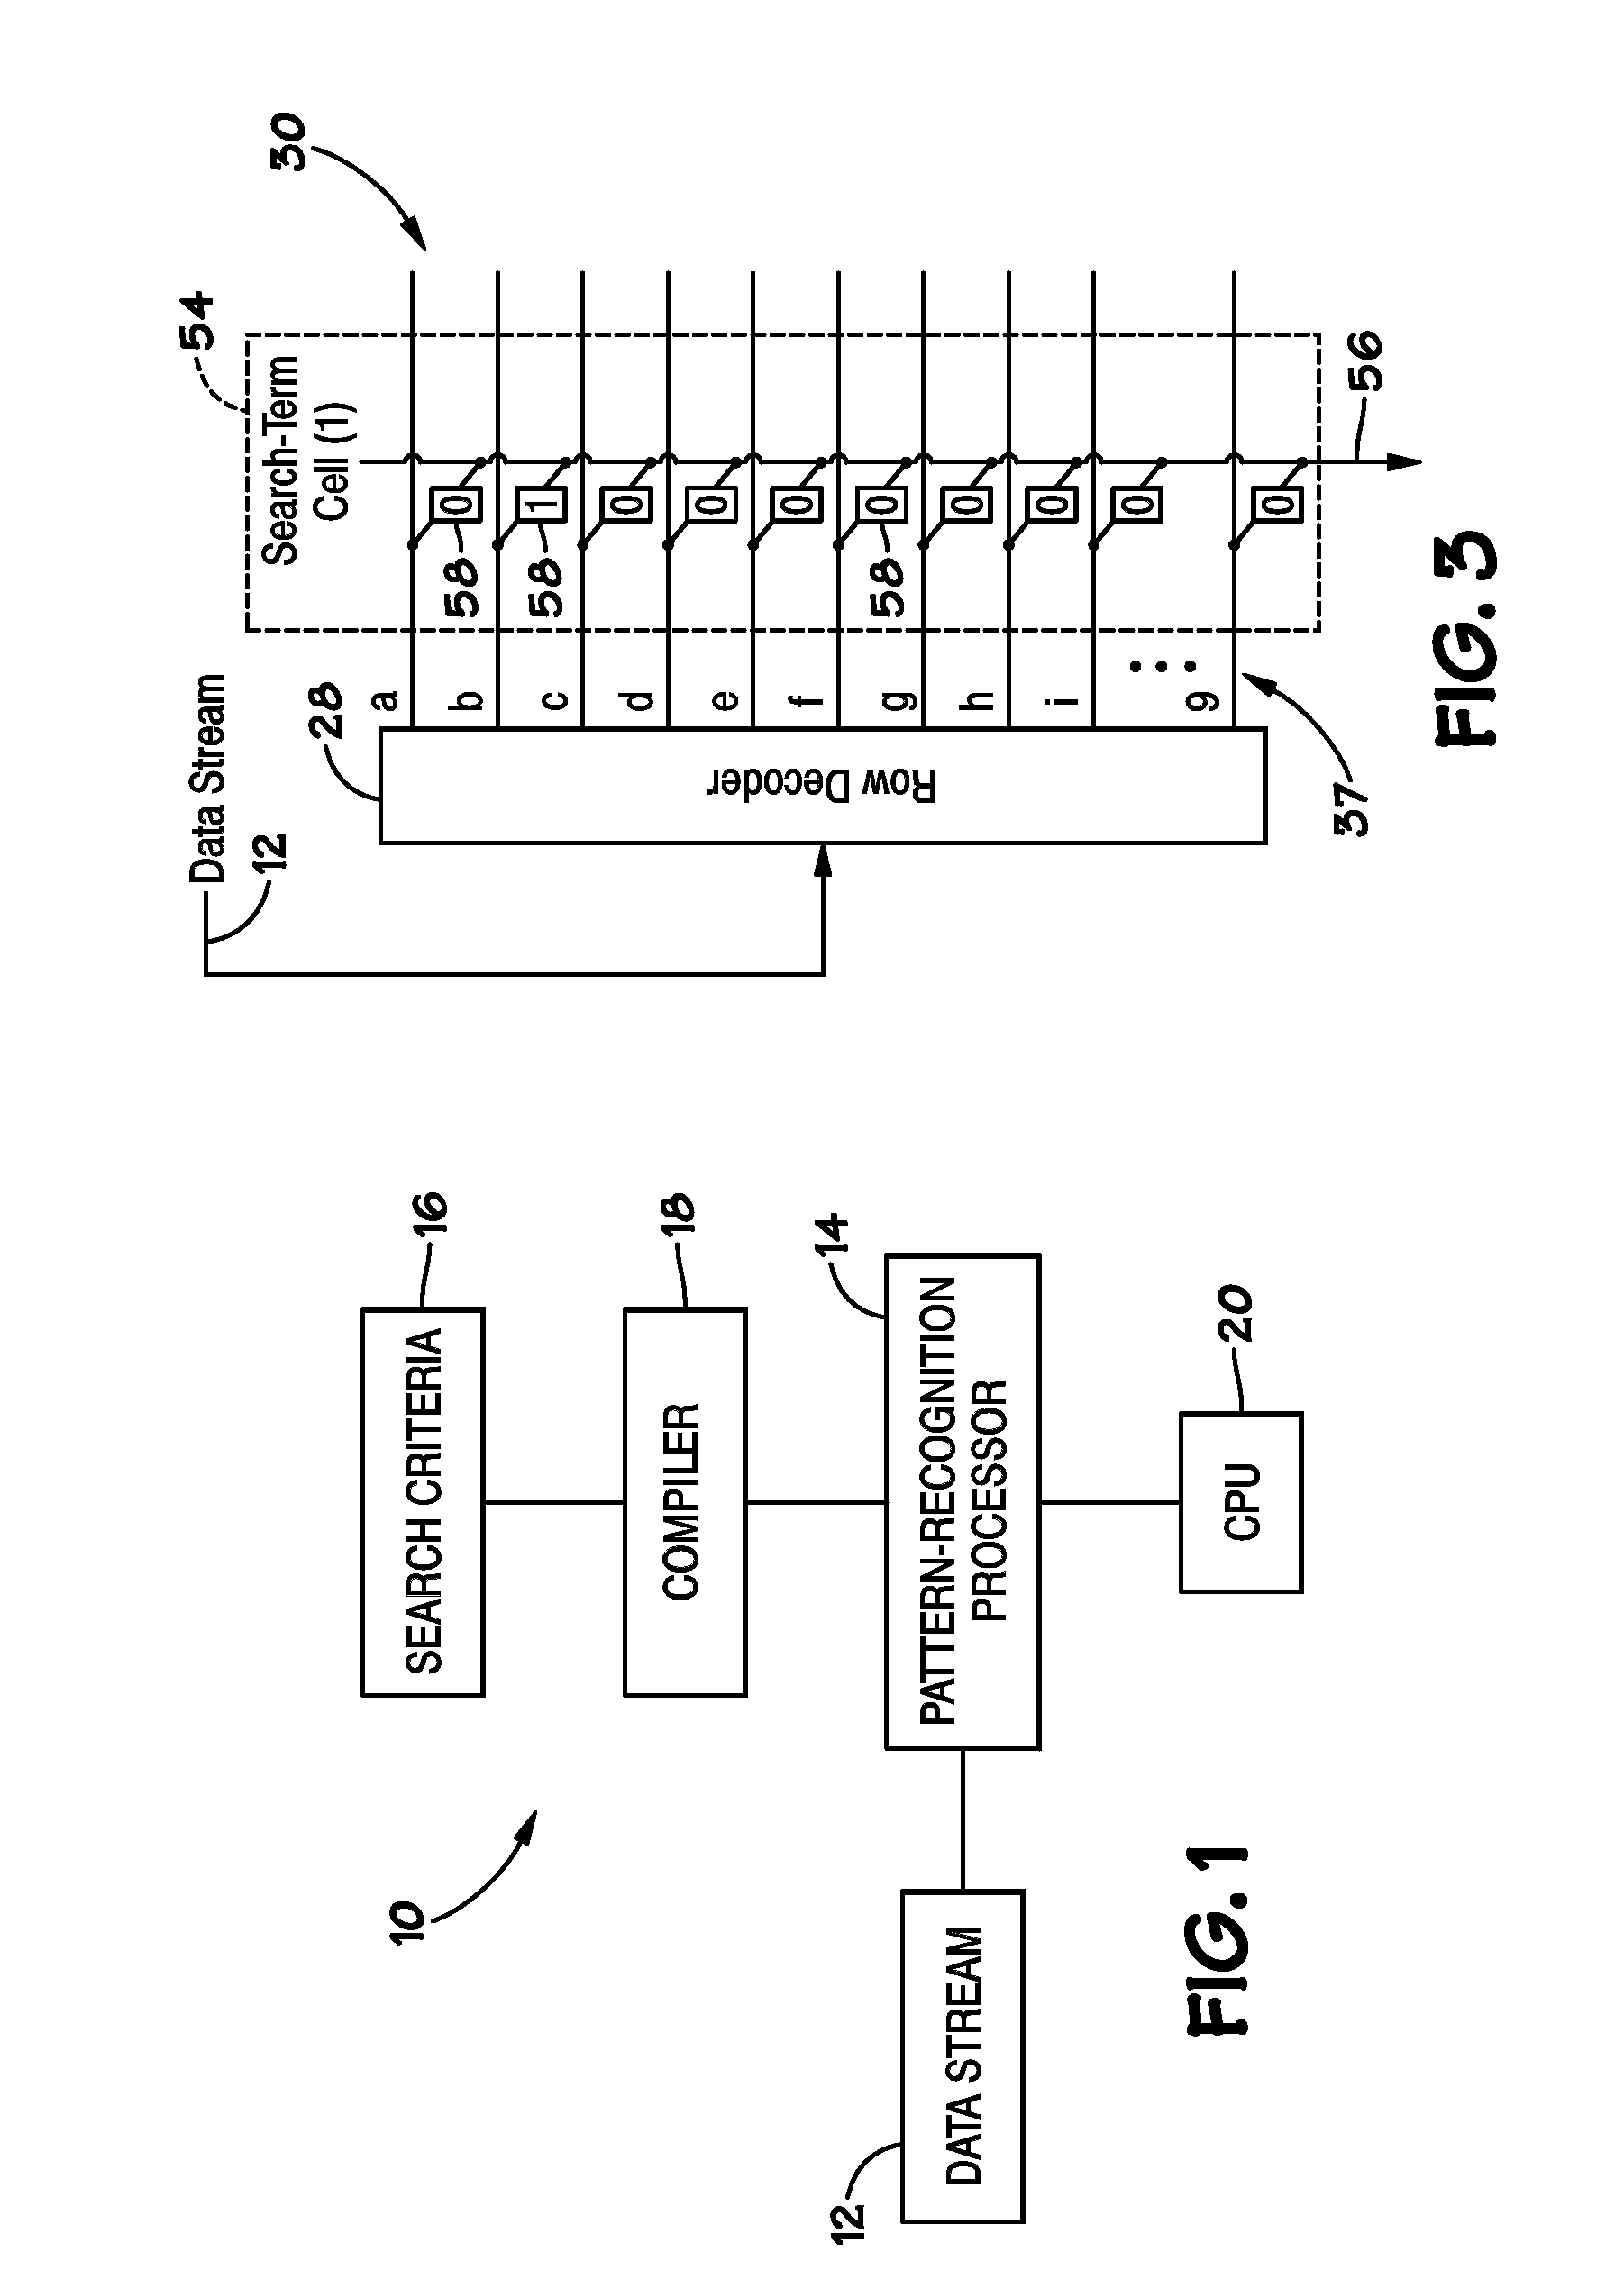 Systems and Methods to Enable Identification of Different Data Sets